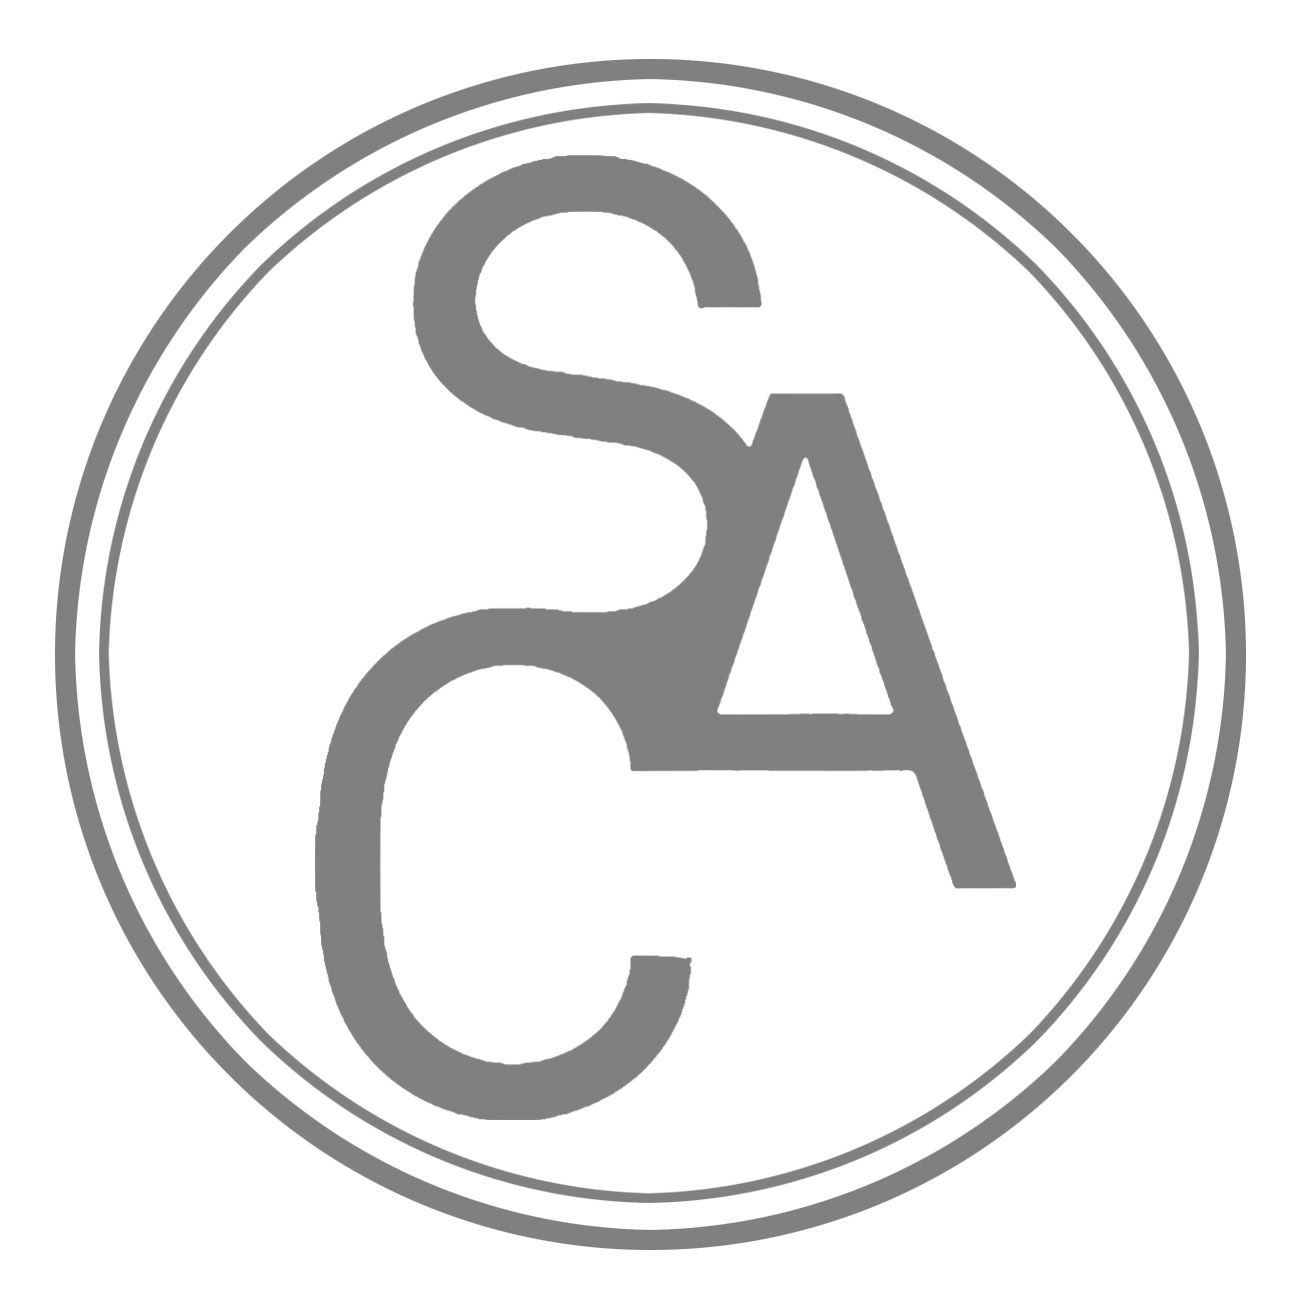 SAC (Architect & Engineers)|Accounting Services|Professional Services